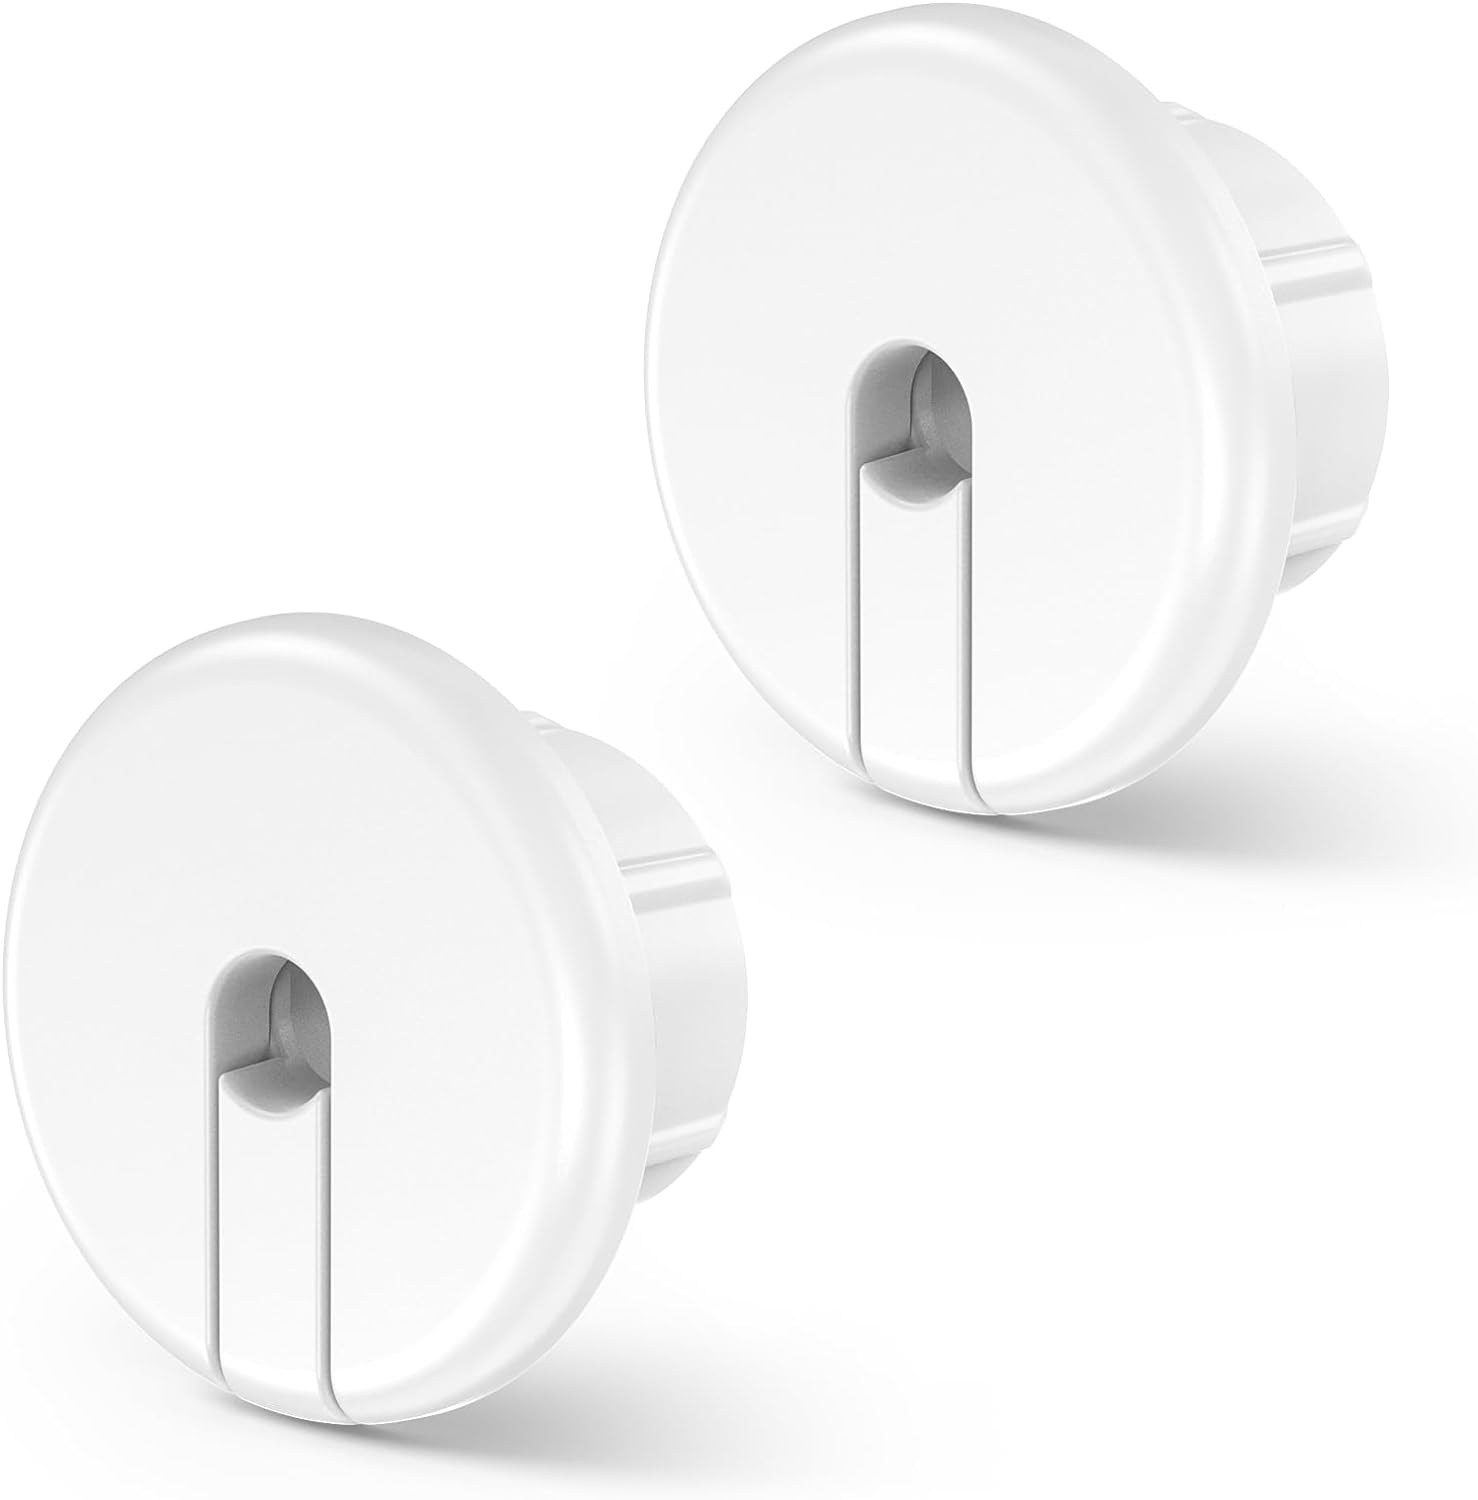 Wall Bushing for Starlink Dishy Ethernet Cable, 1-Inch Starlink Cable Routing Kit Wall Hole Feed-Through Cable Bushing for Starlink Ethernet Cable Grommet Furniture Wire Holes (White, 2 Pack)